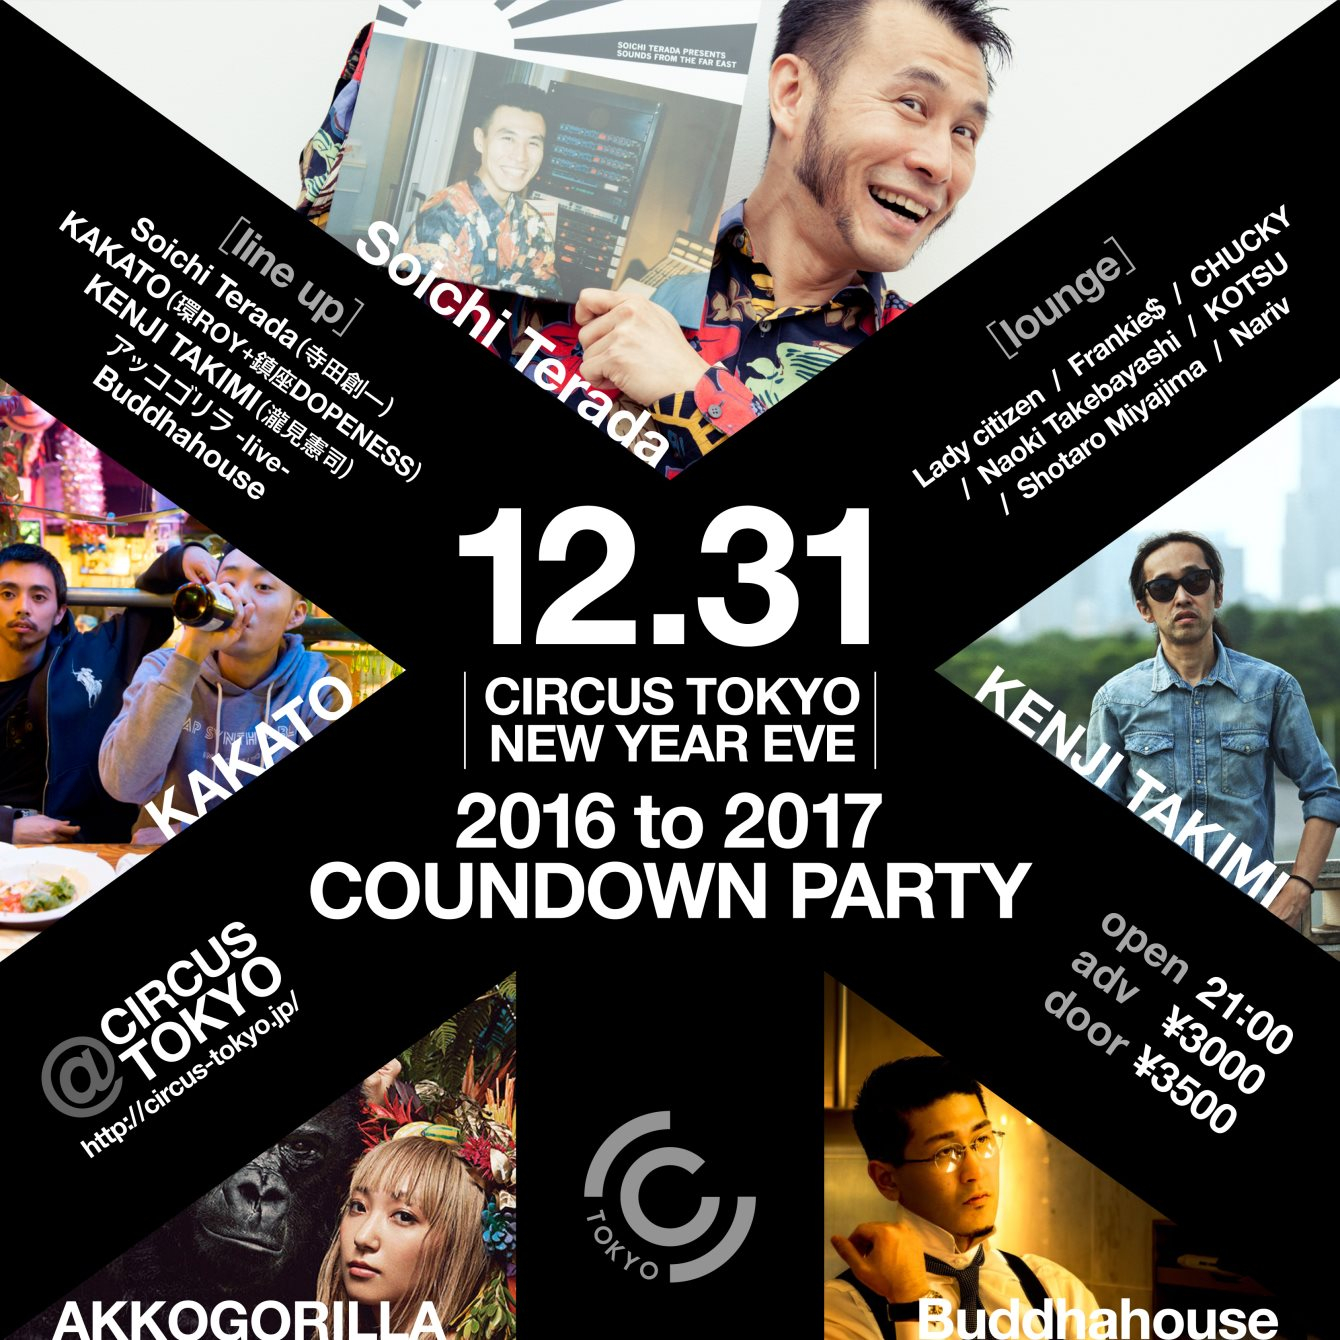 Circus Tokyo Countdown Party 2016 to 2017 - Flyer front